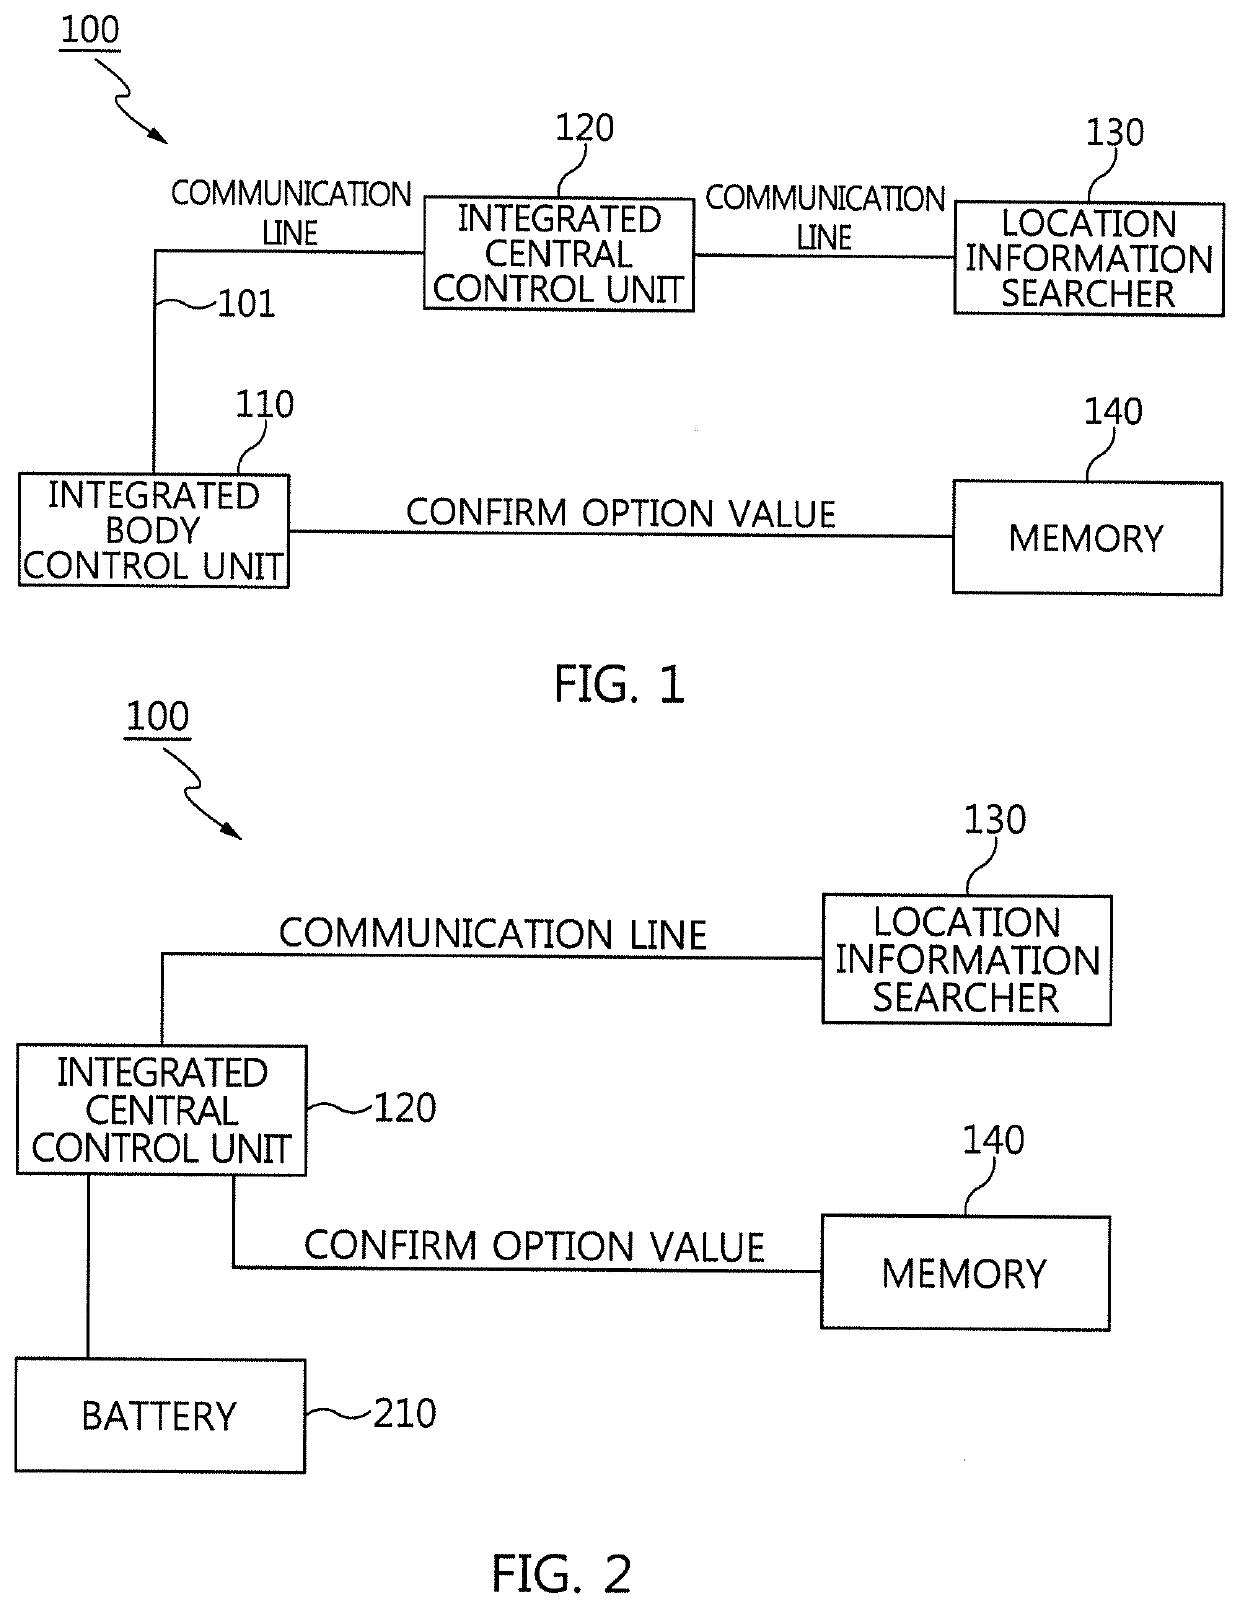 Apparatus and method for correcting option misjudgment of control unit